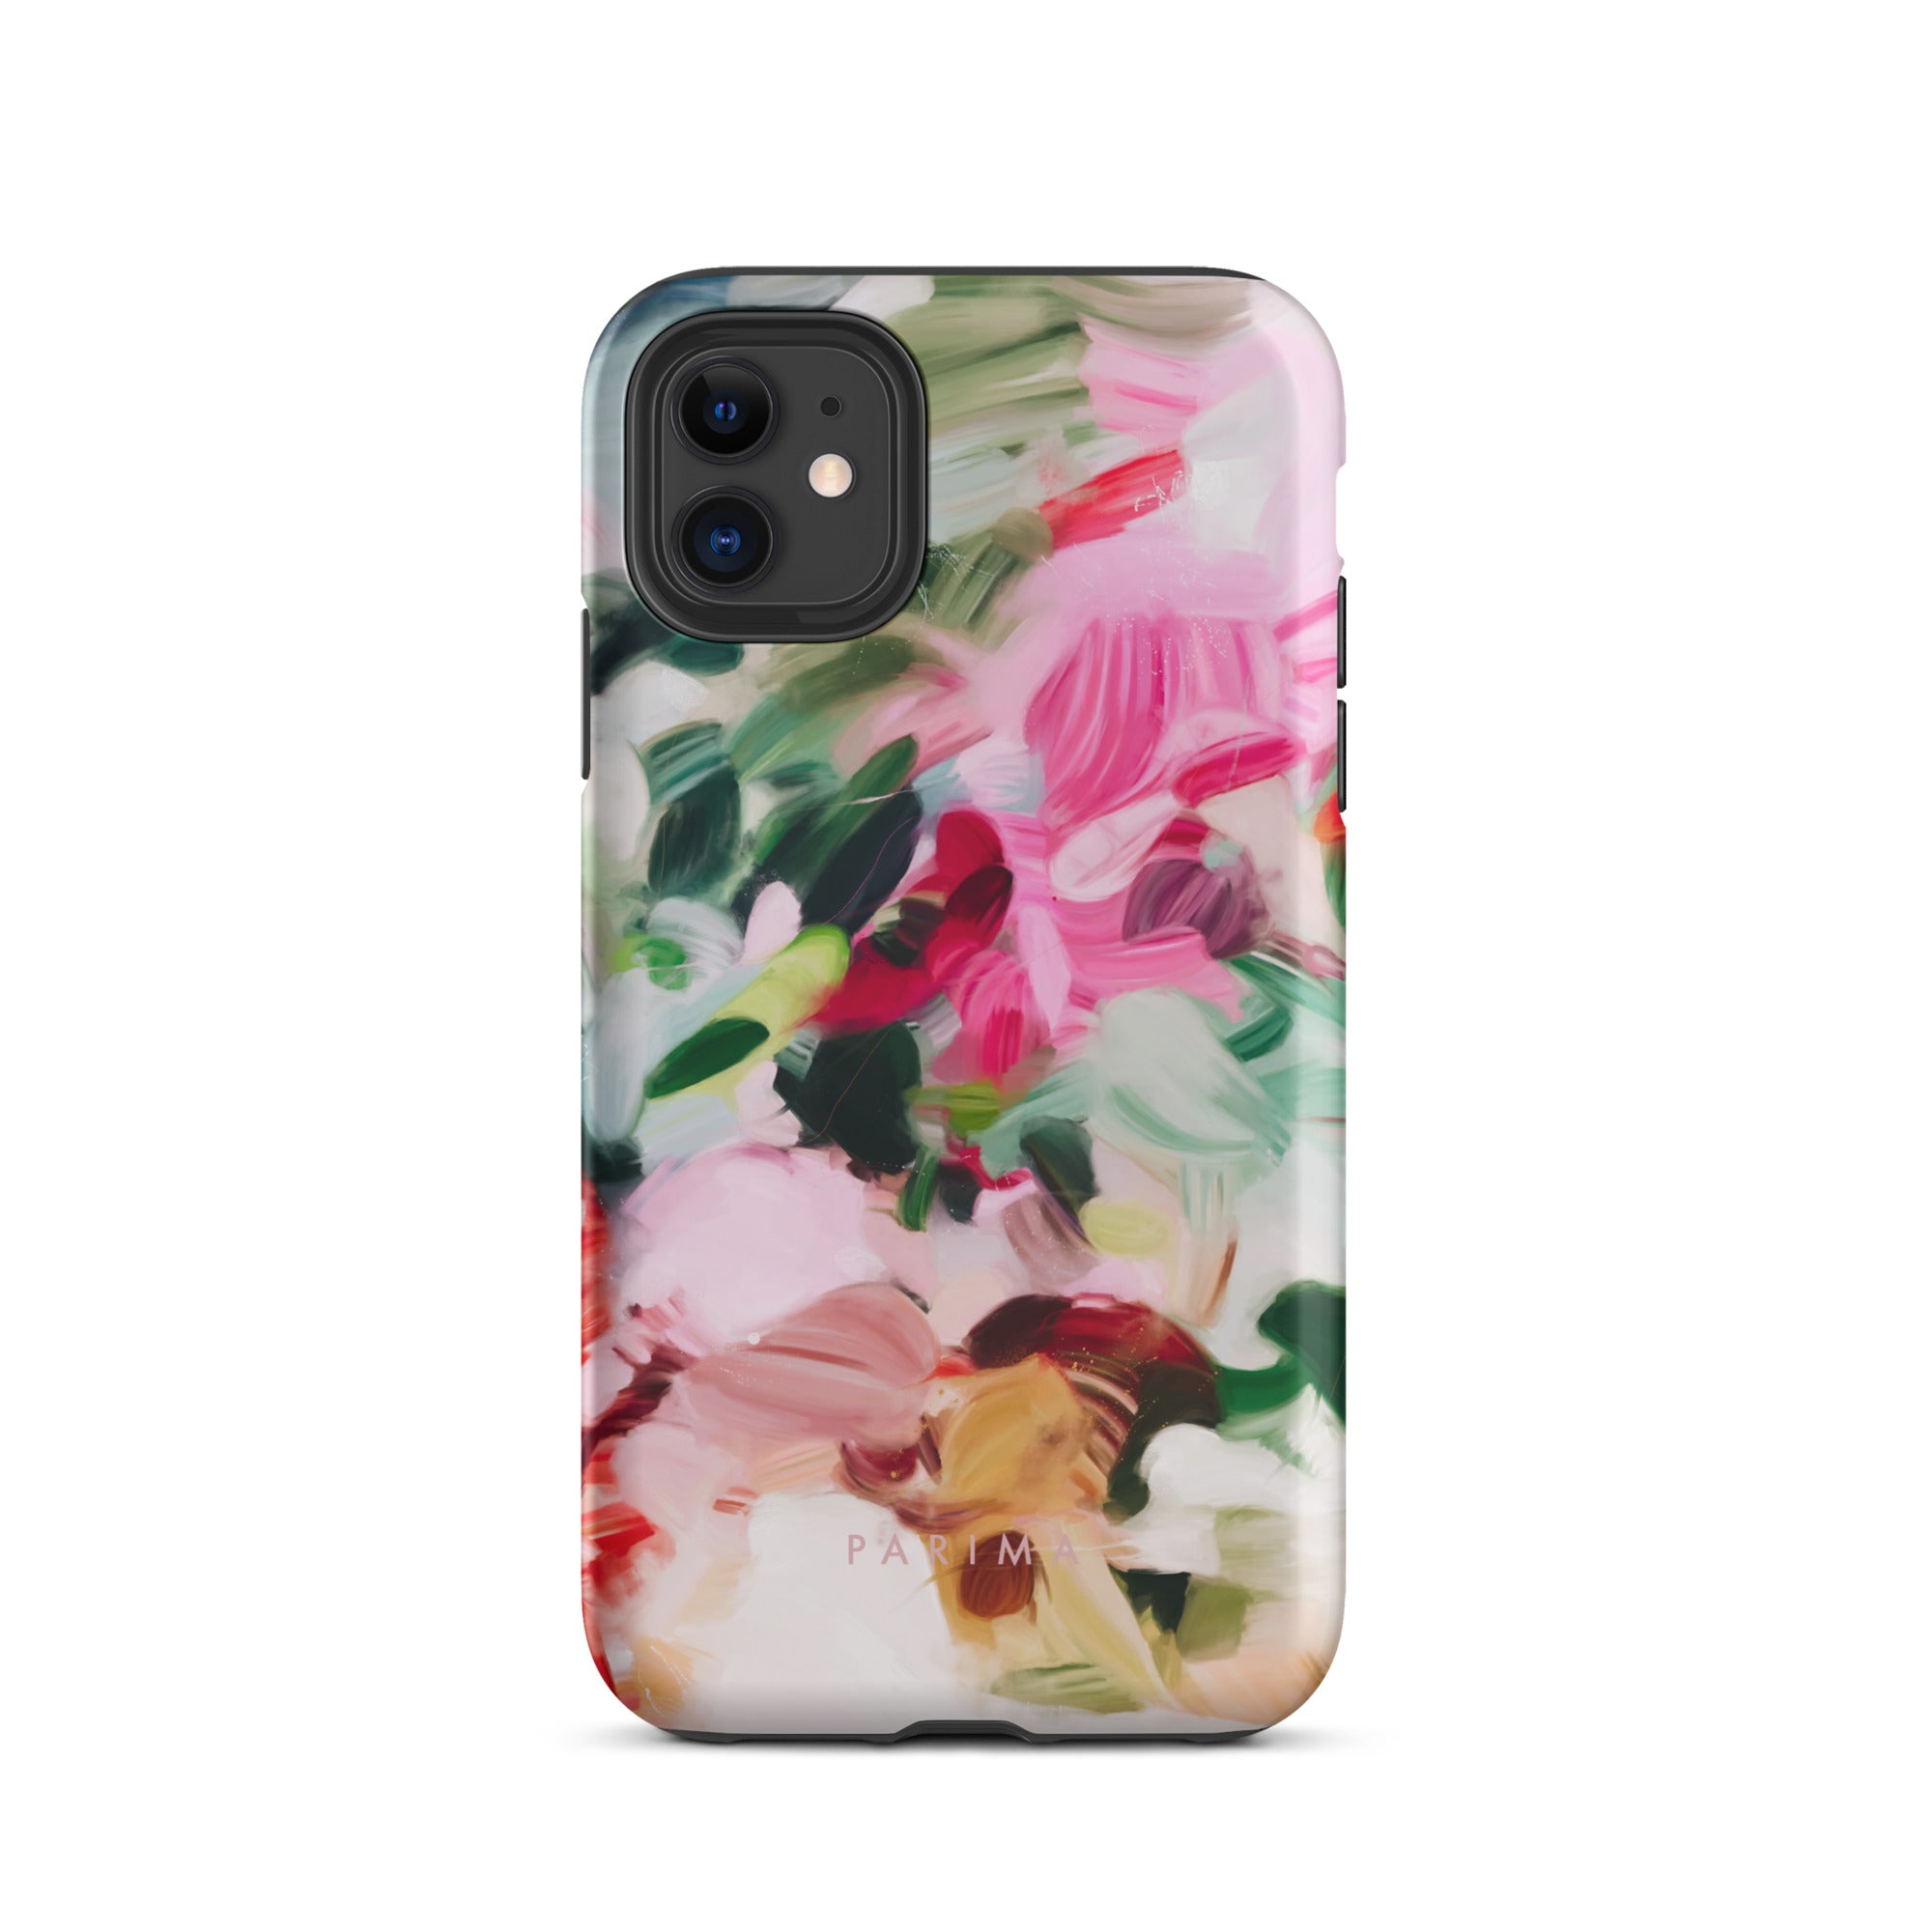 Bloom, pink and green abstract art - iPhone 11 tough case by Parima Studio